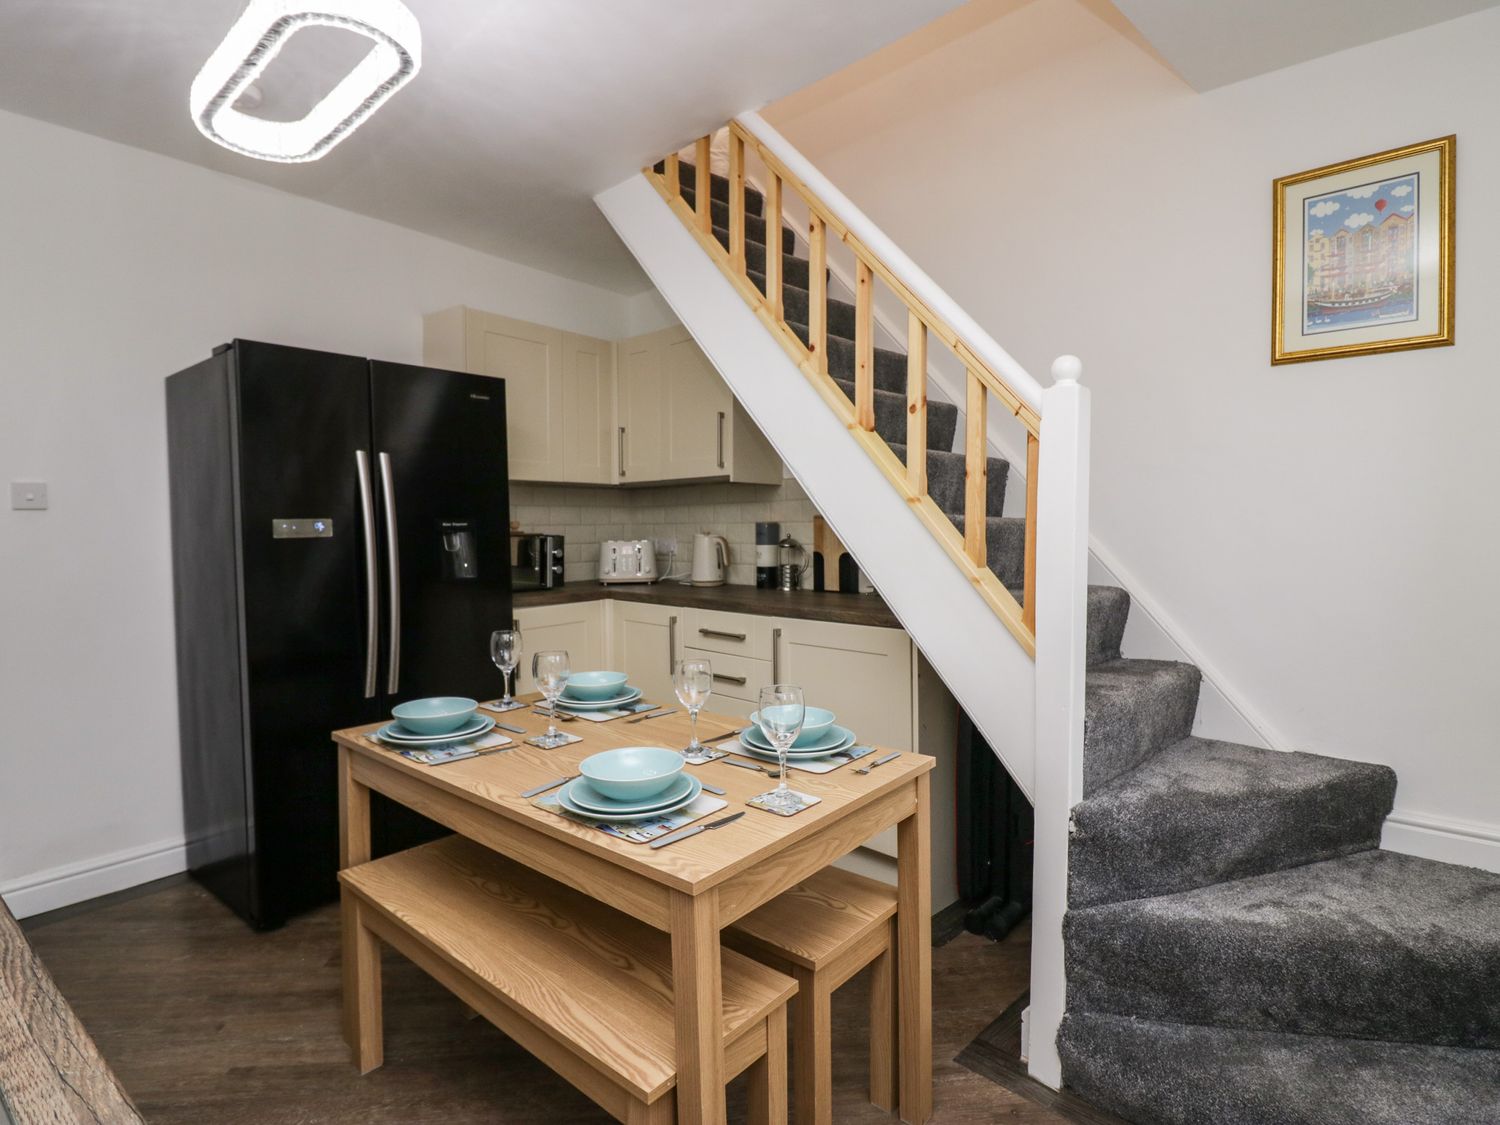 Bay Cottage No 7 in Morecambe, Lancashire. Two-bedroom home near amenities and beach. Hot tub. Pets.